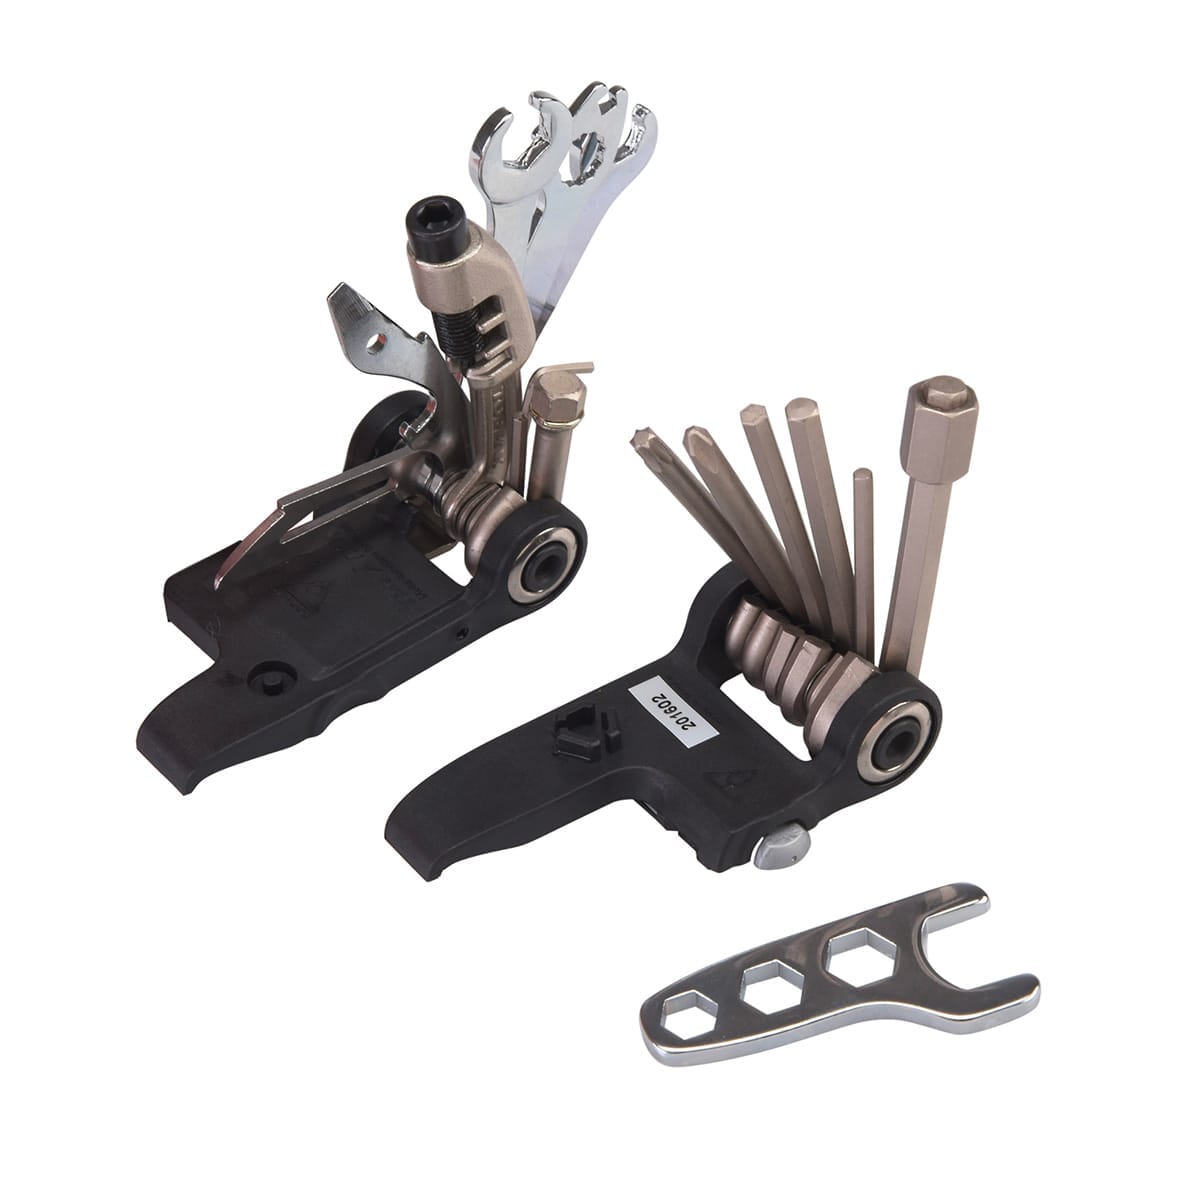 Multi-Outils TOPEAK ALIEN II (26 Outils + Housse)